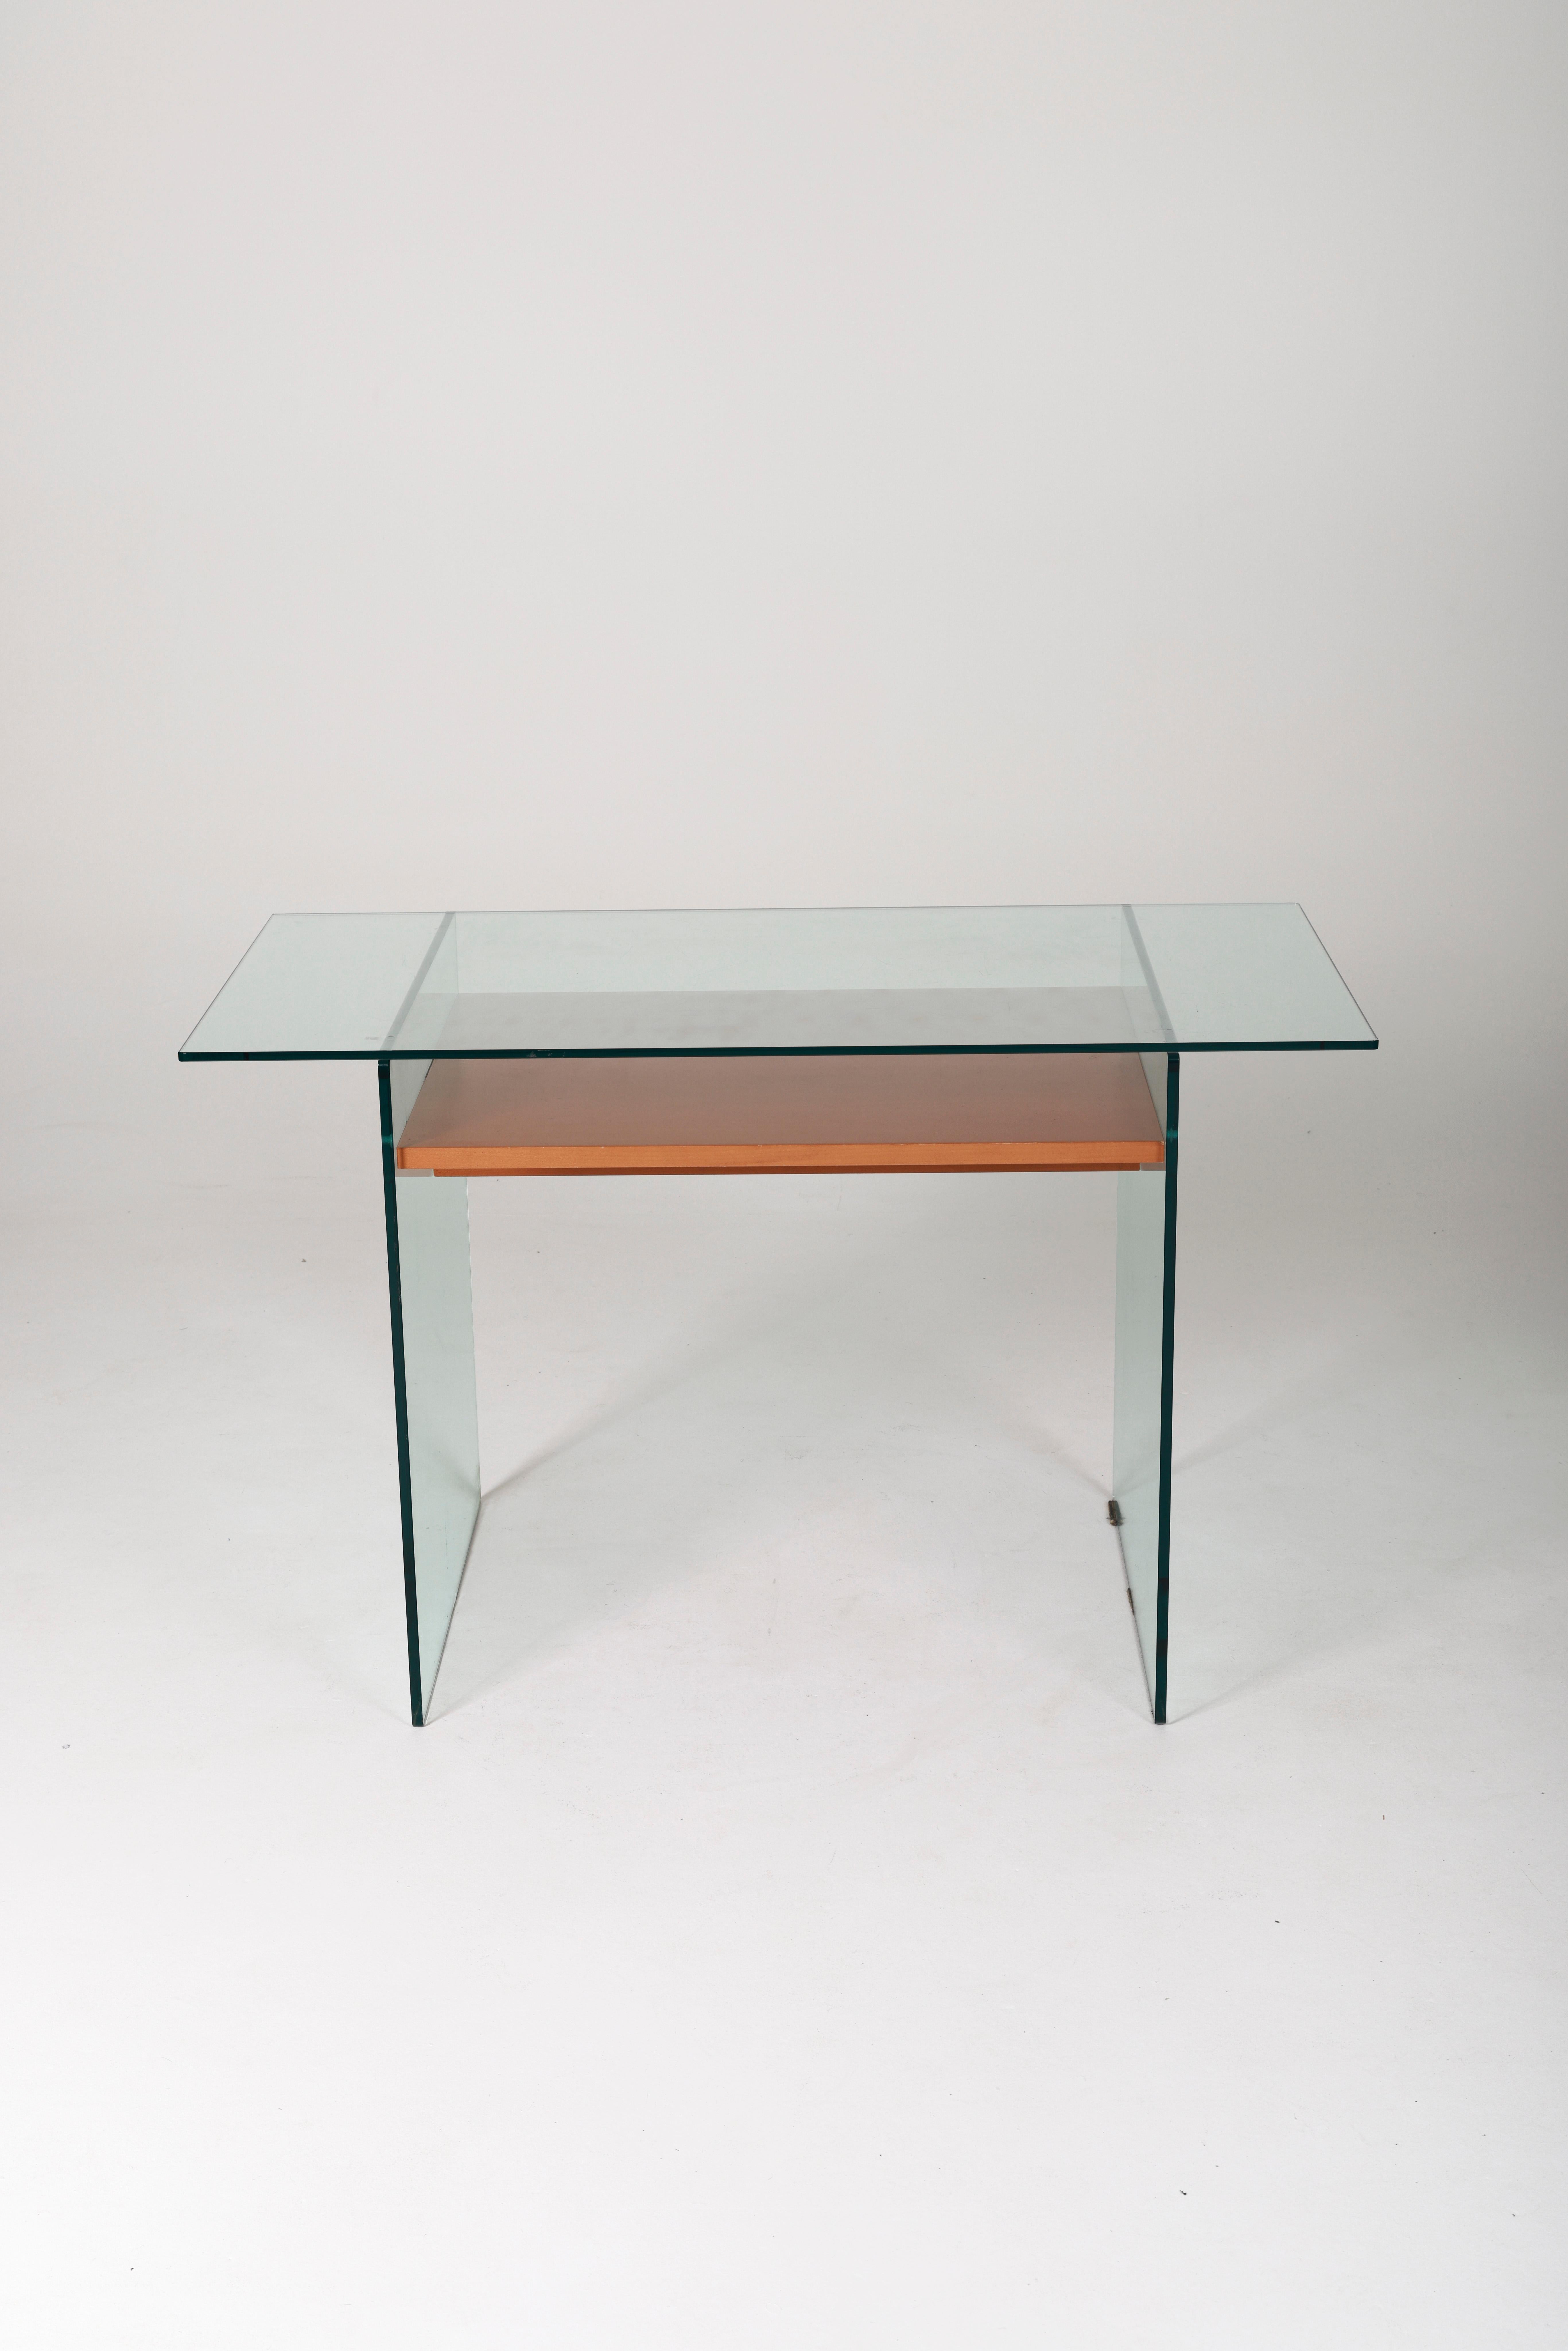 20th Century Glass and wood desk, 1980s